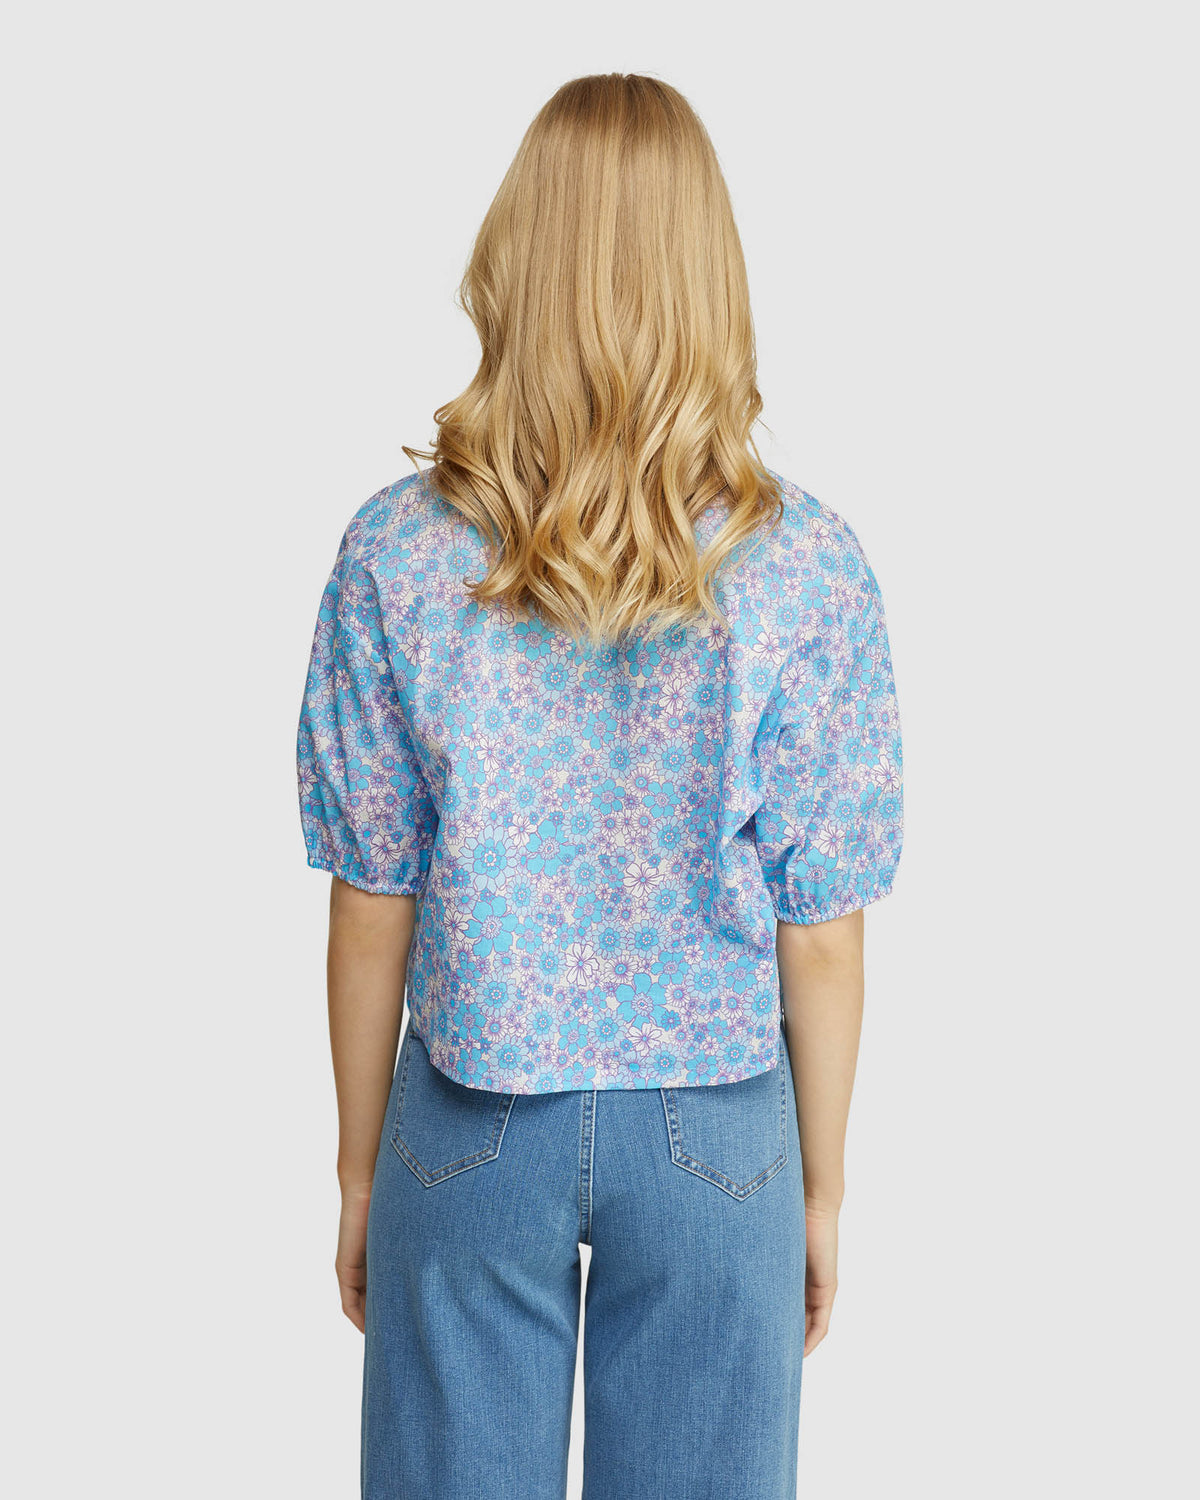 RALEIGH COTTON RETRO FLORAL TOP WOMENS TOPS